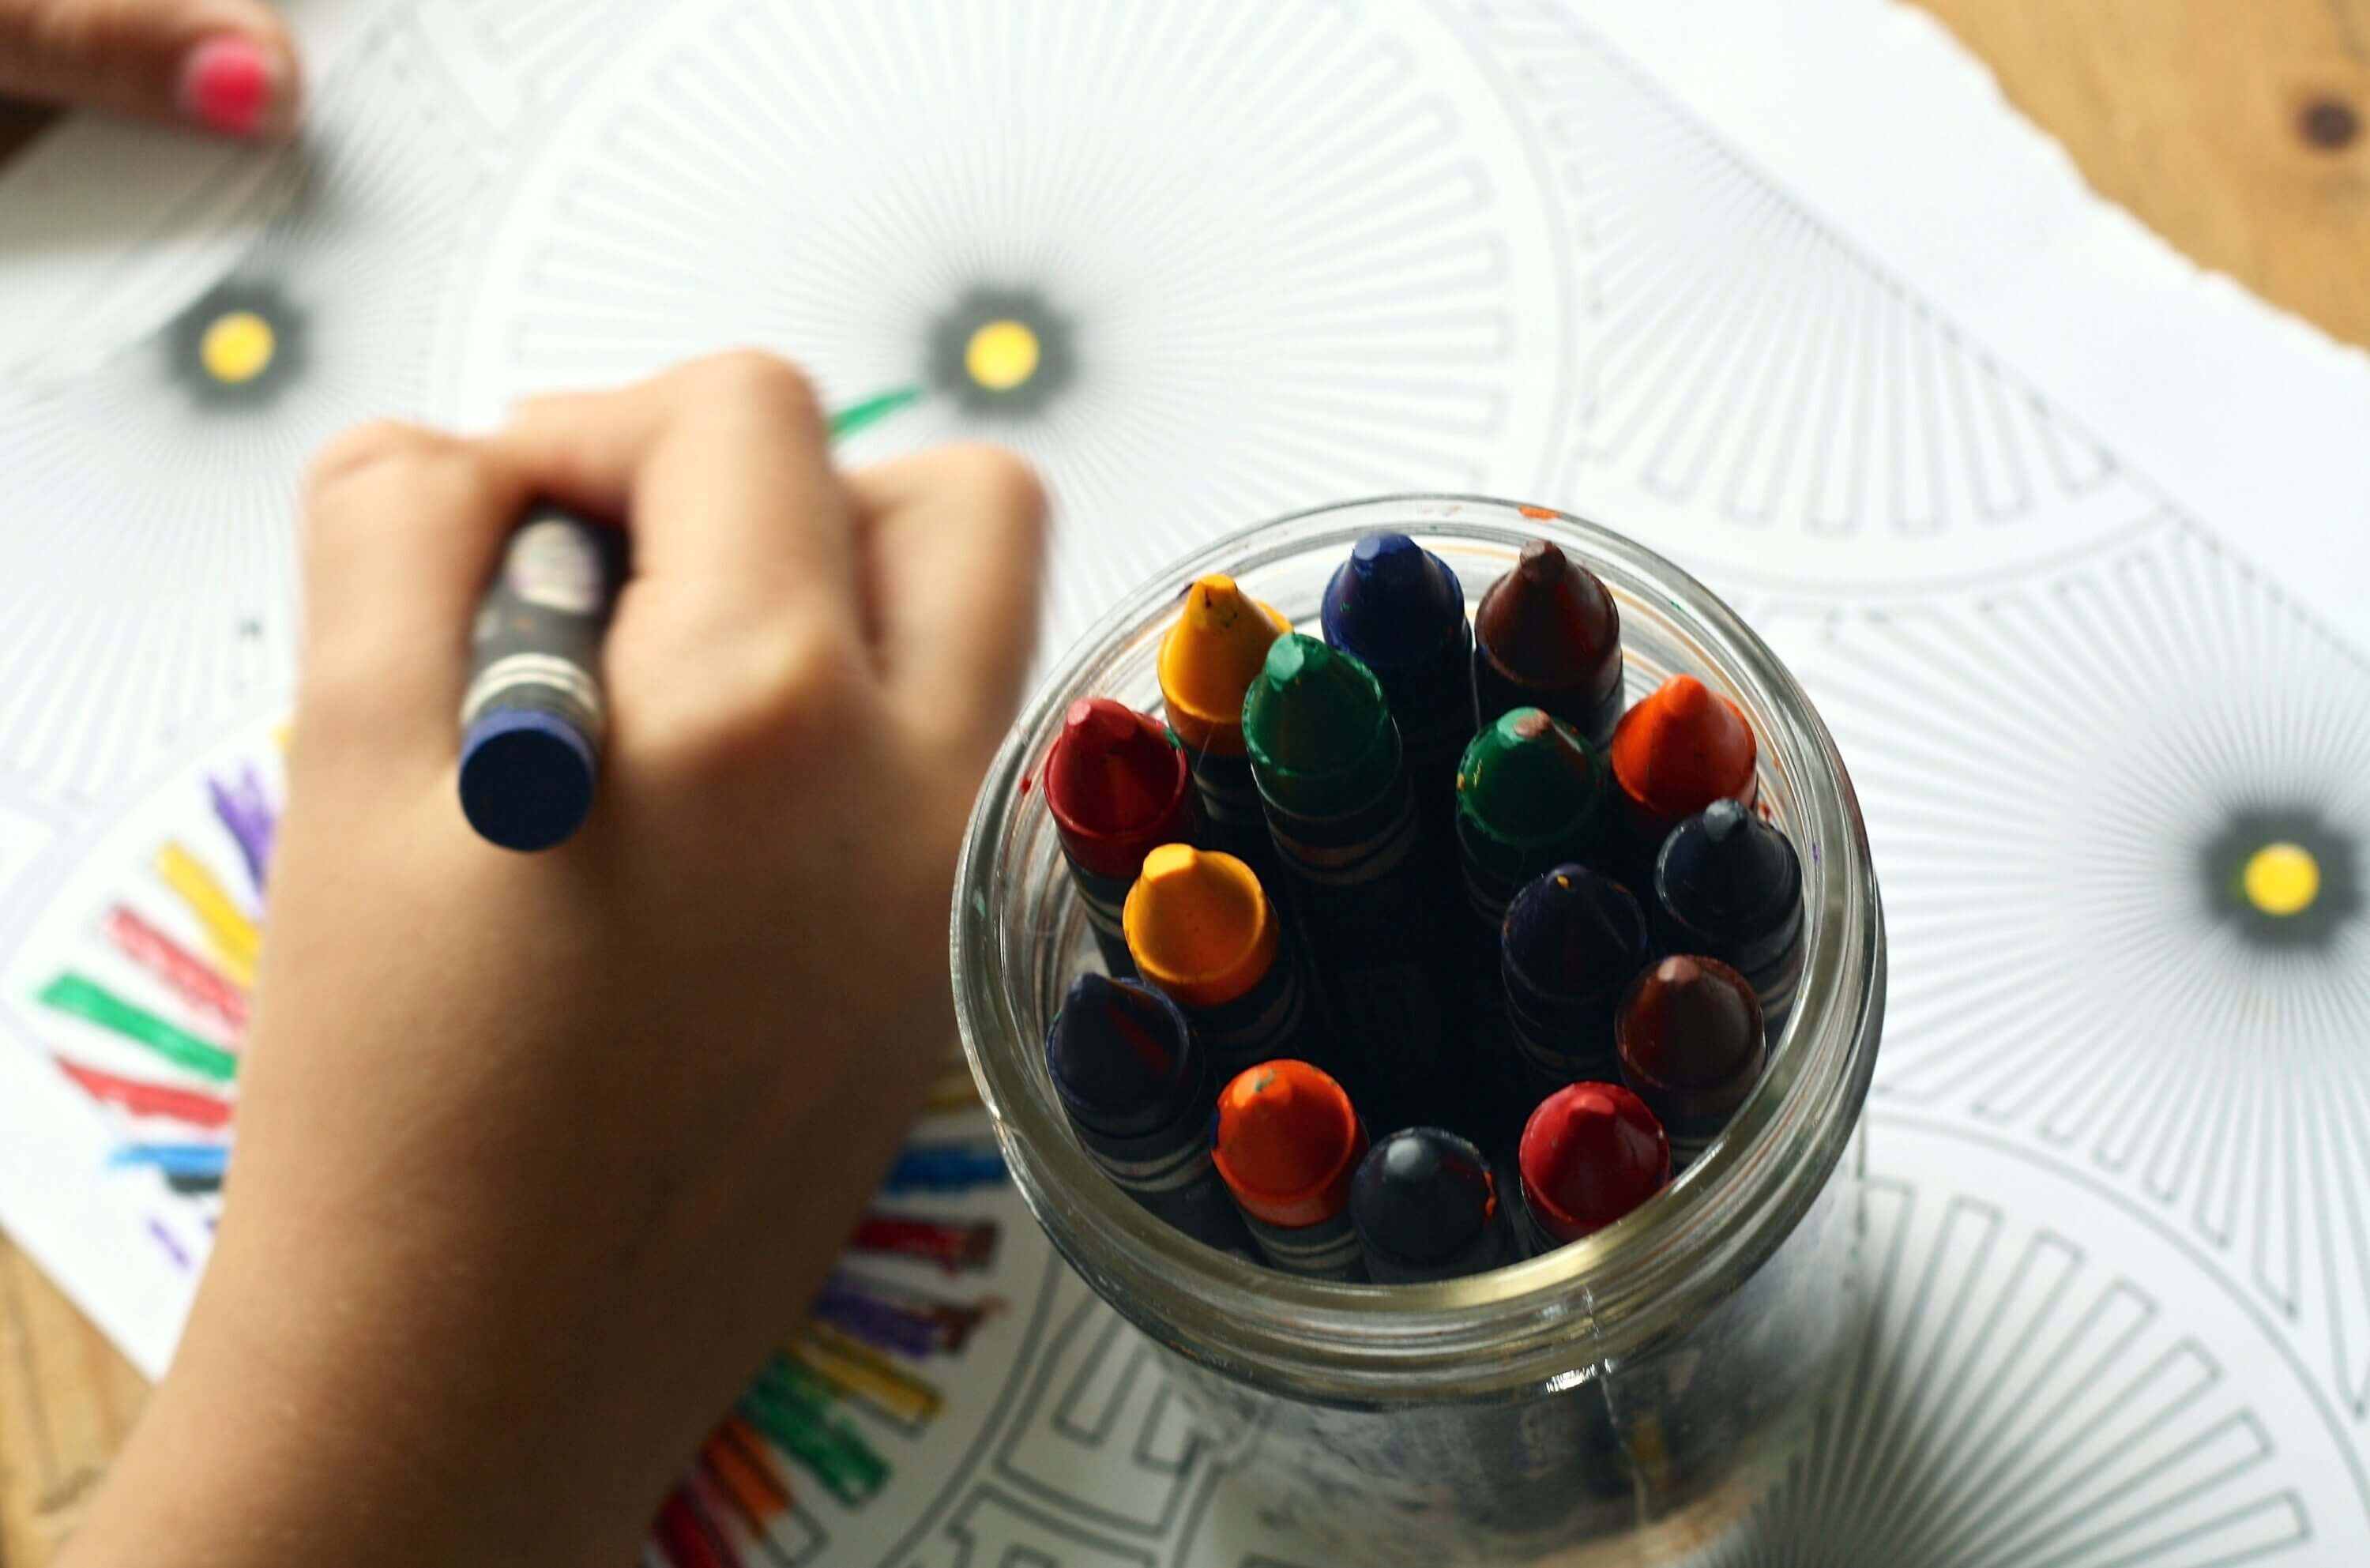 A child colors a printed coloring sheet with a cup of crayons next to their hand.